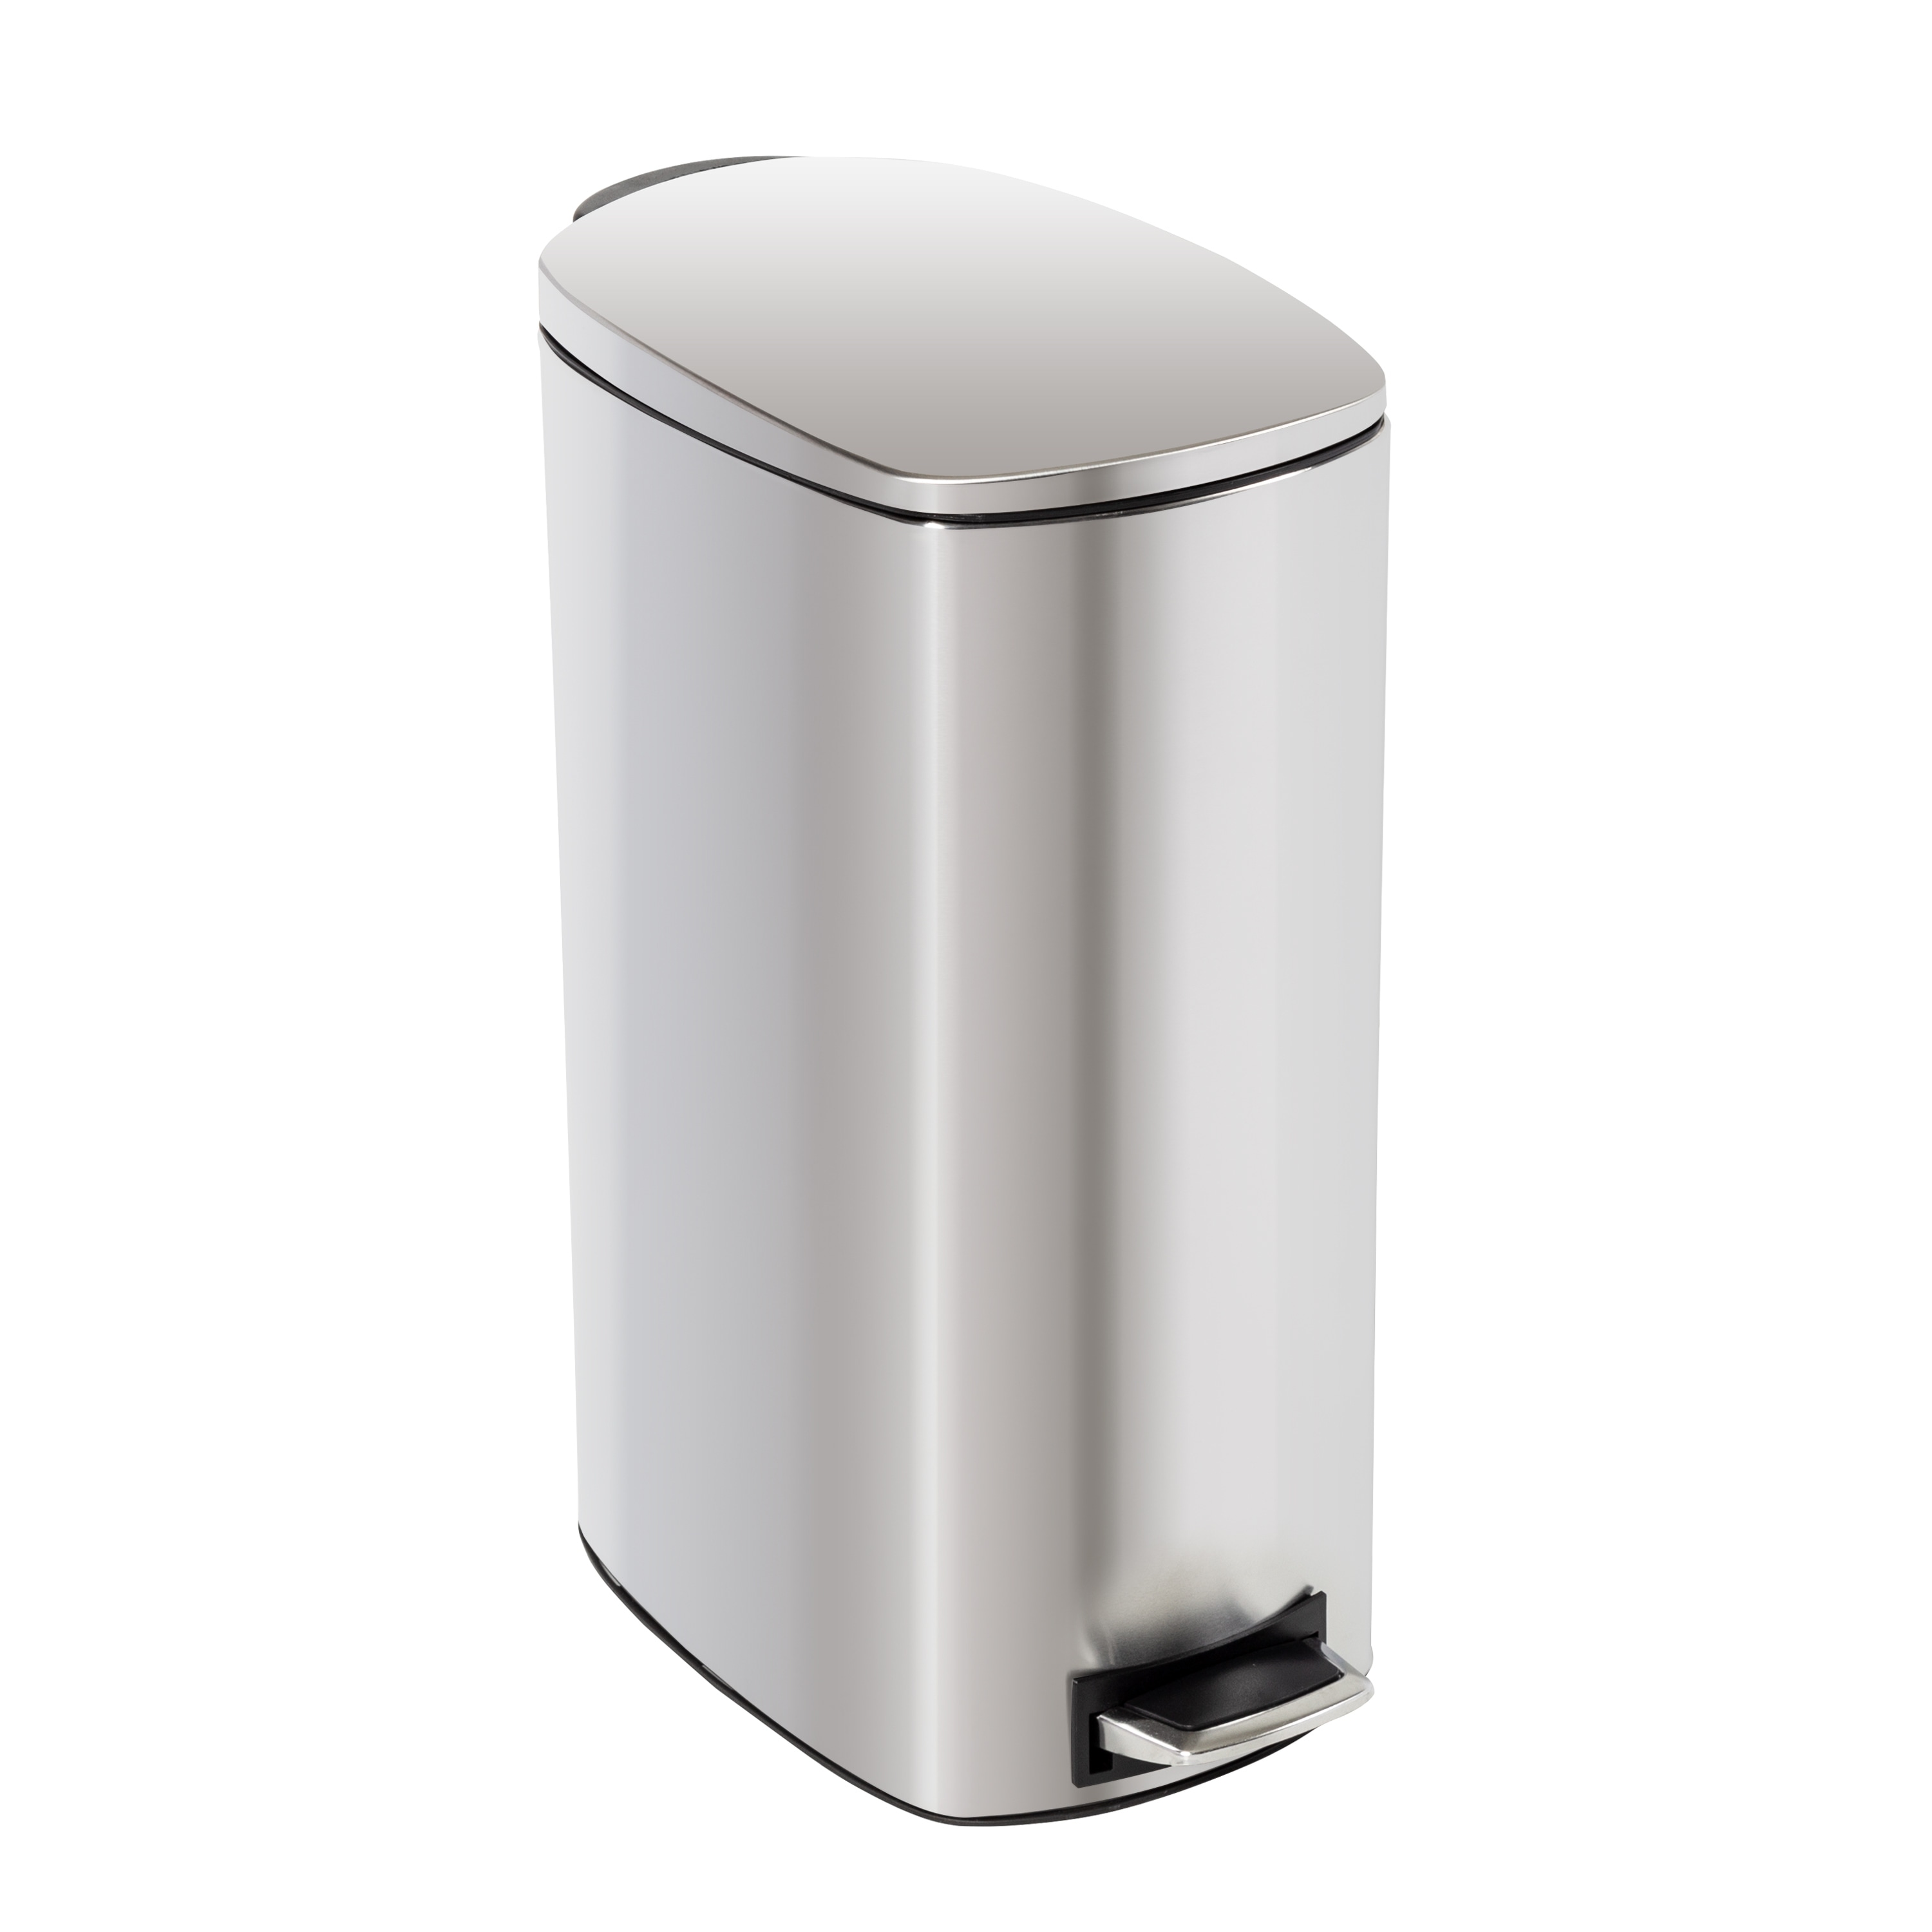 https://ak1.ostkcdn.com/images/products/is/images/direct/5440f84c797a8512d01b708d1dc7cce0eafa2e74/Tall-Slim-40-Liter-Stainless-Steel-Step-Trash-Can-with-Lid.jpg